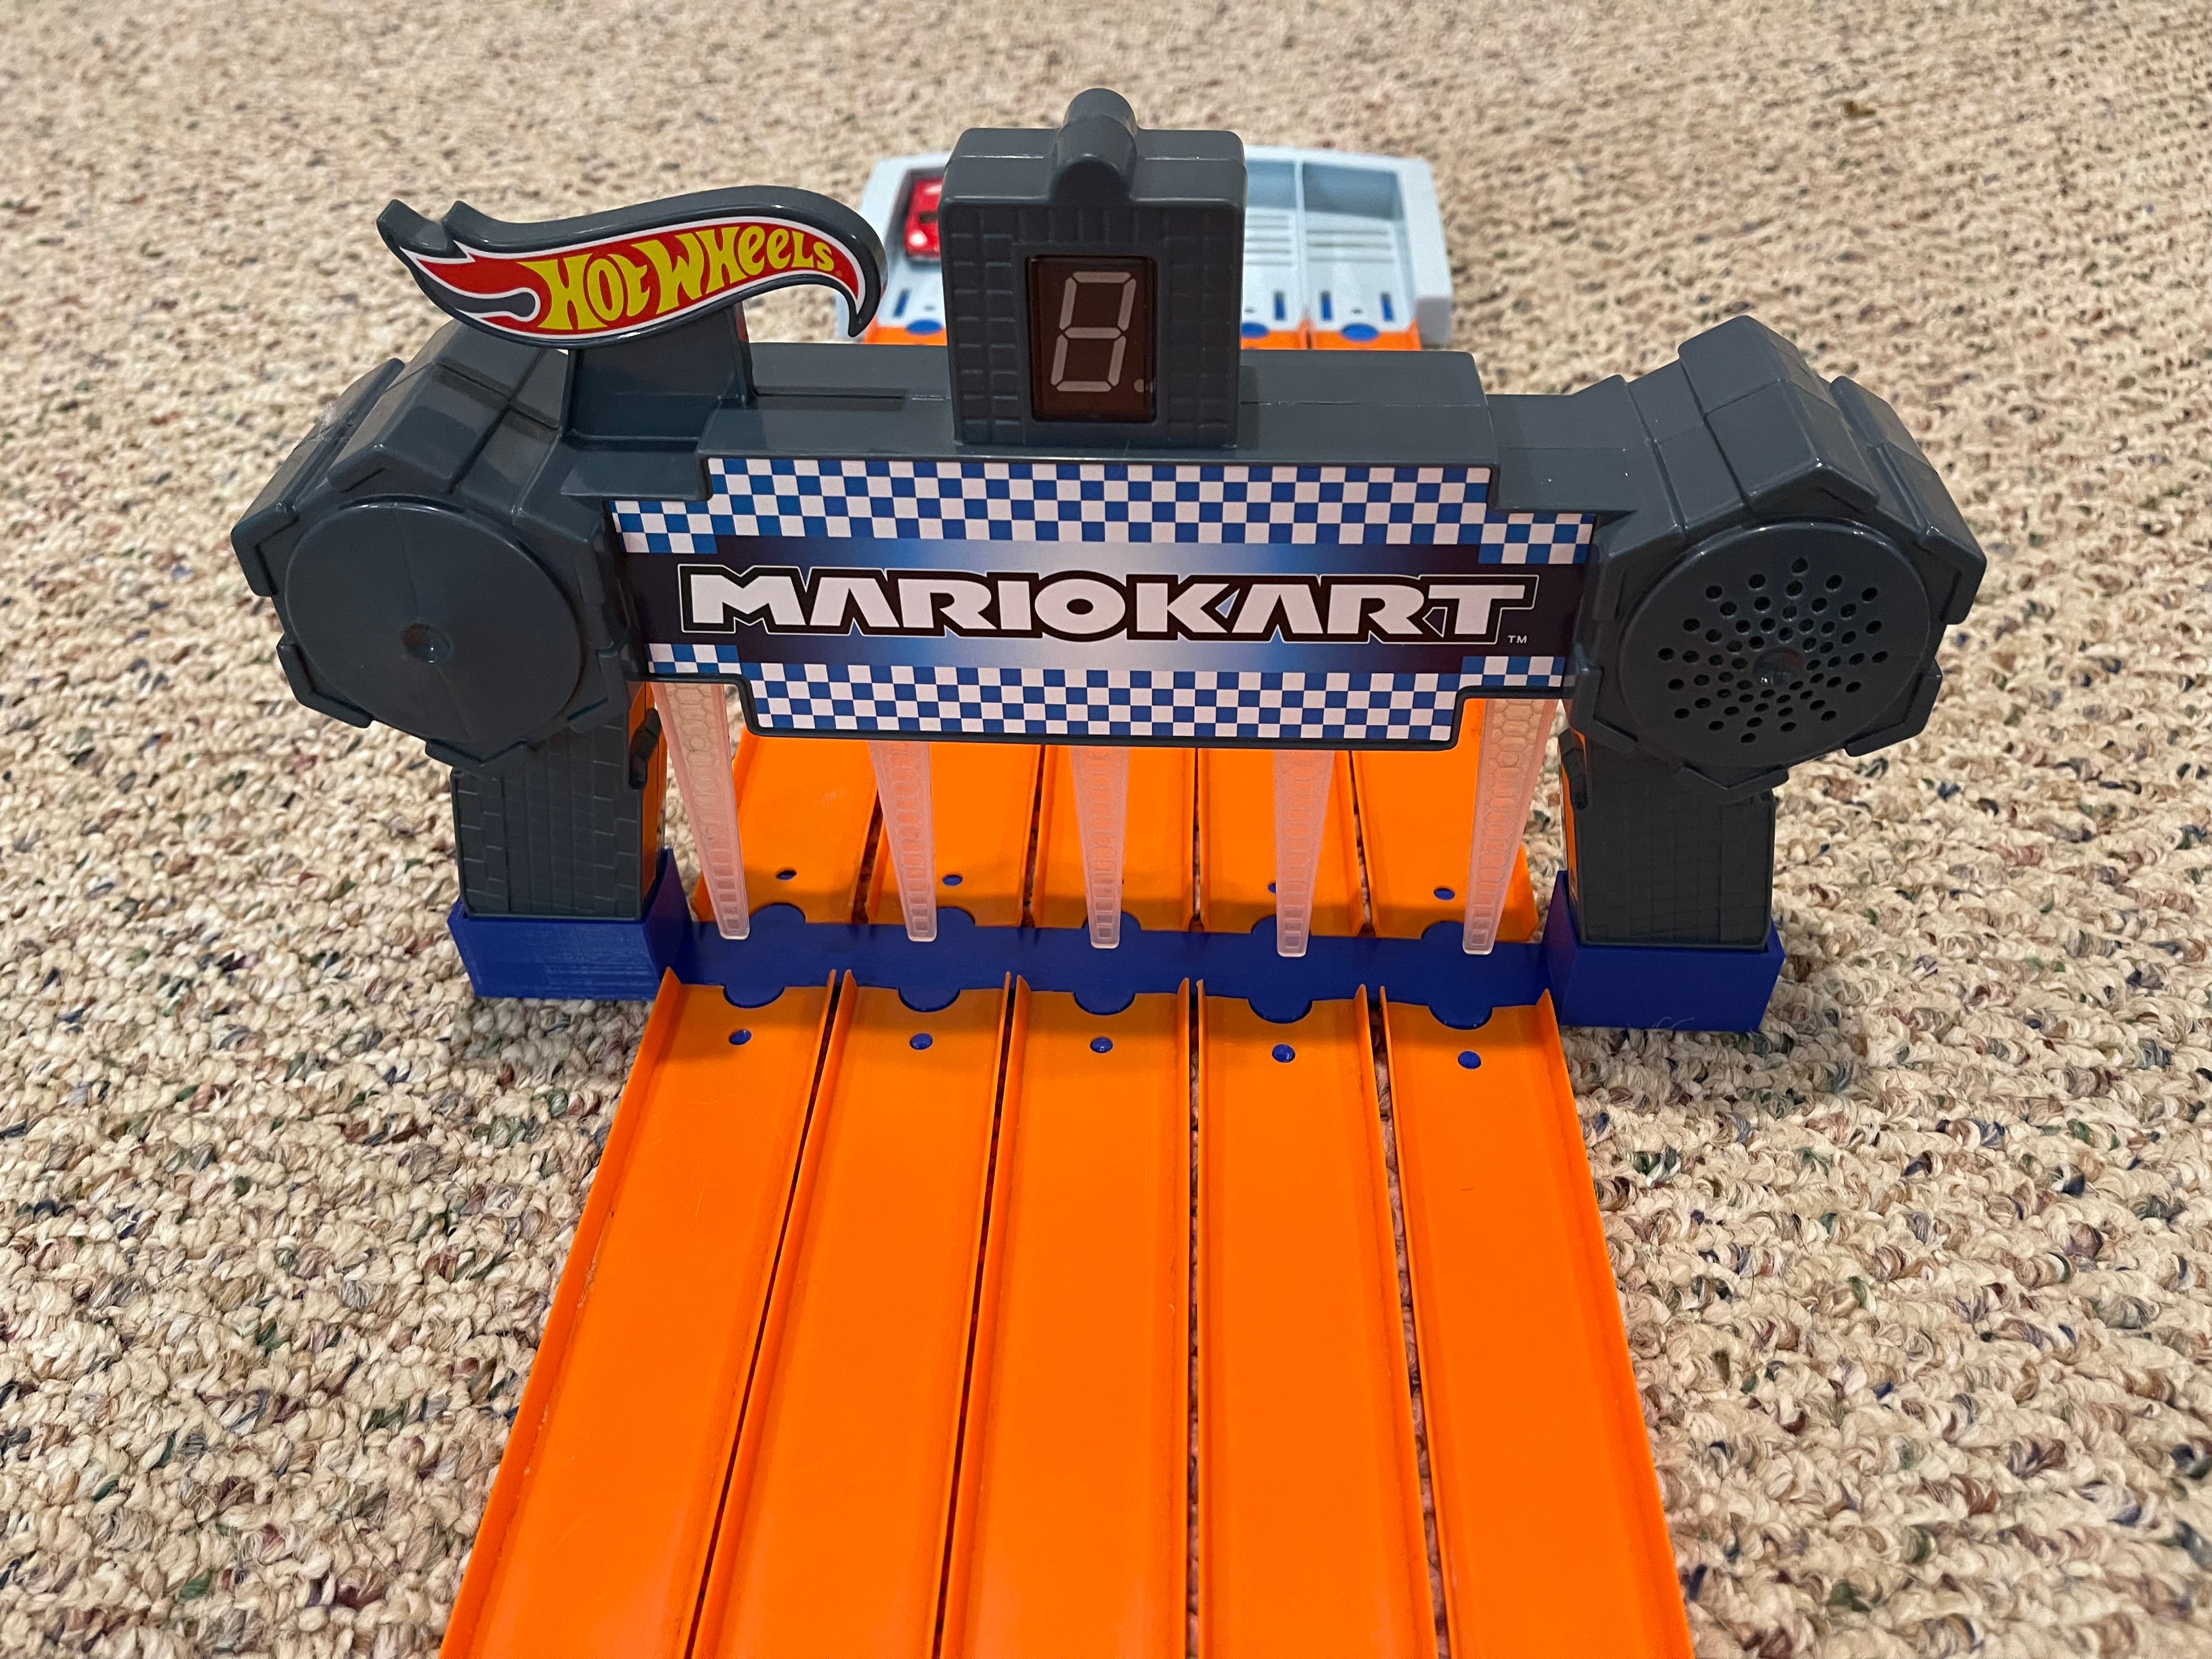 Hot Wheels Mario Kart Track Set Extension - Rainbow Road Raceway Add-On -  Compatible with 1:64 Scale Vehicles (Gray)